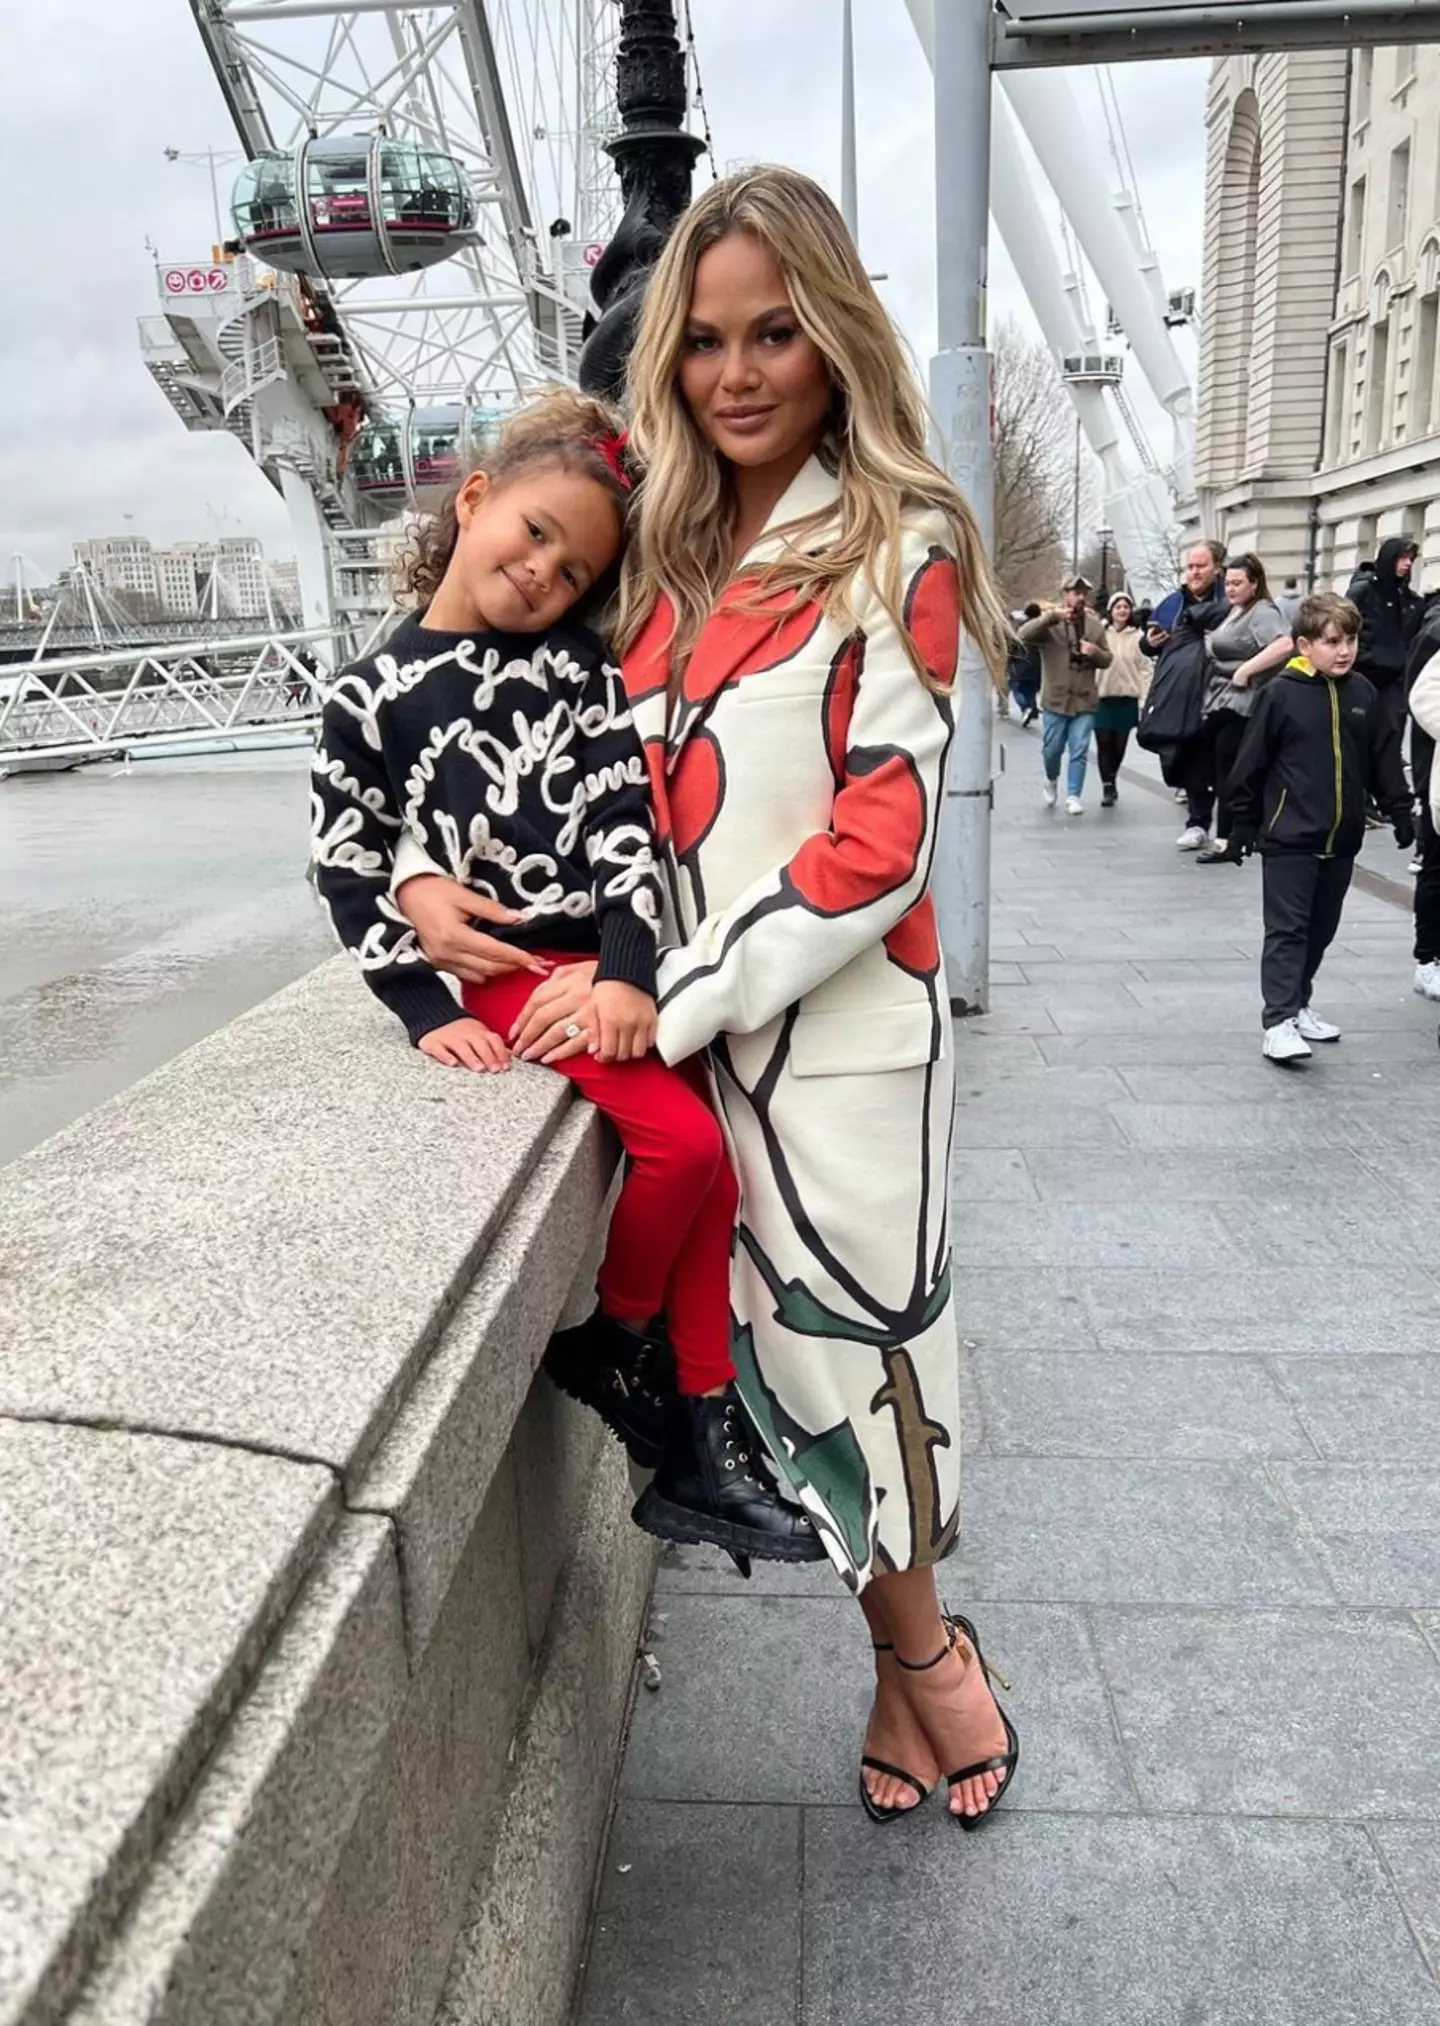 Chrissy and Luna pose by the London Eye (